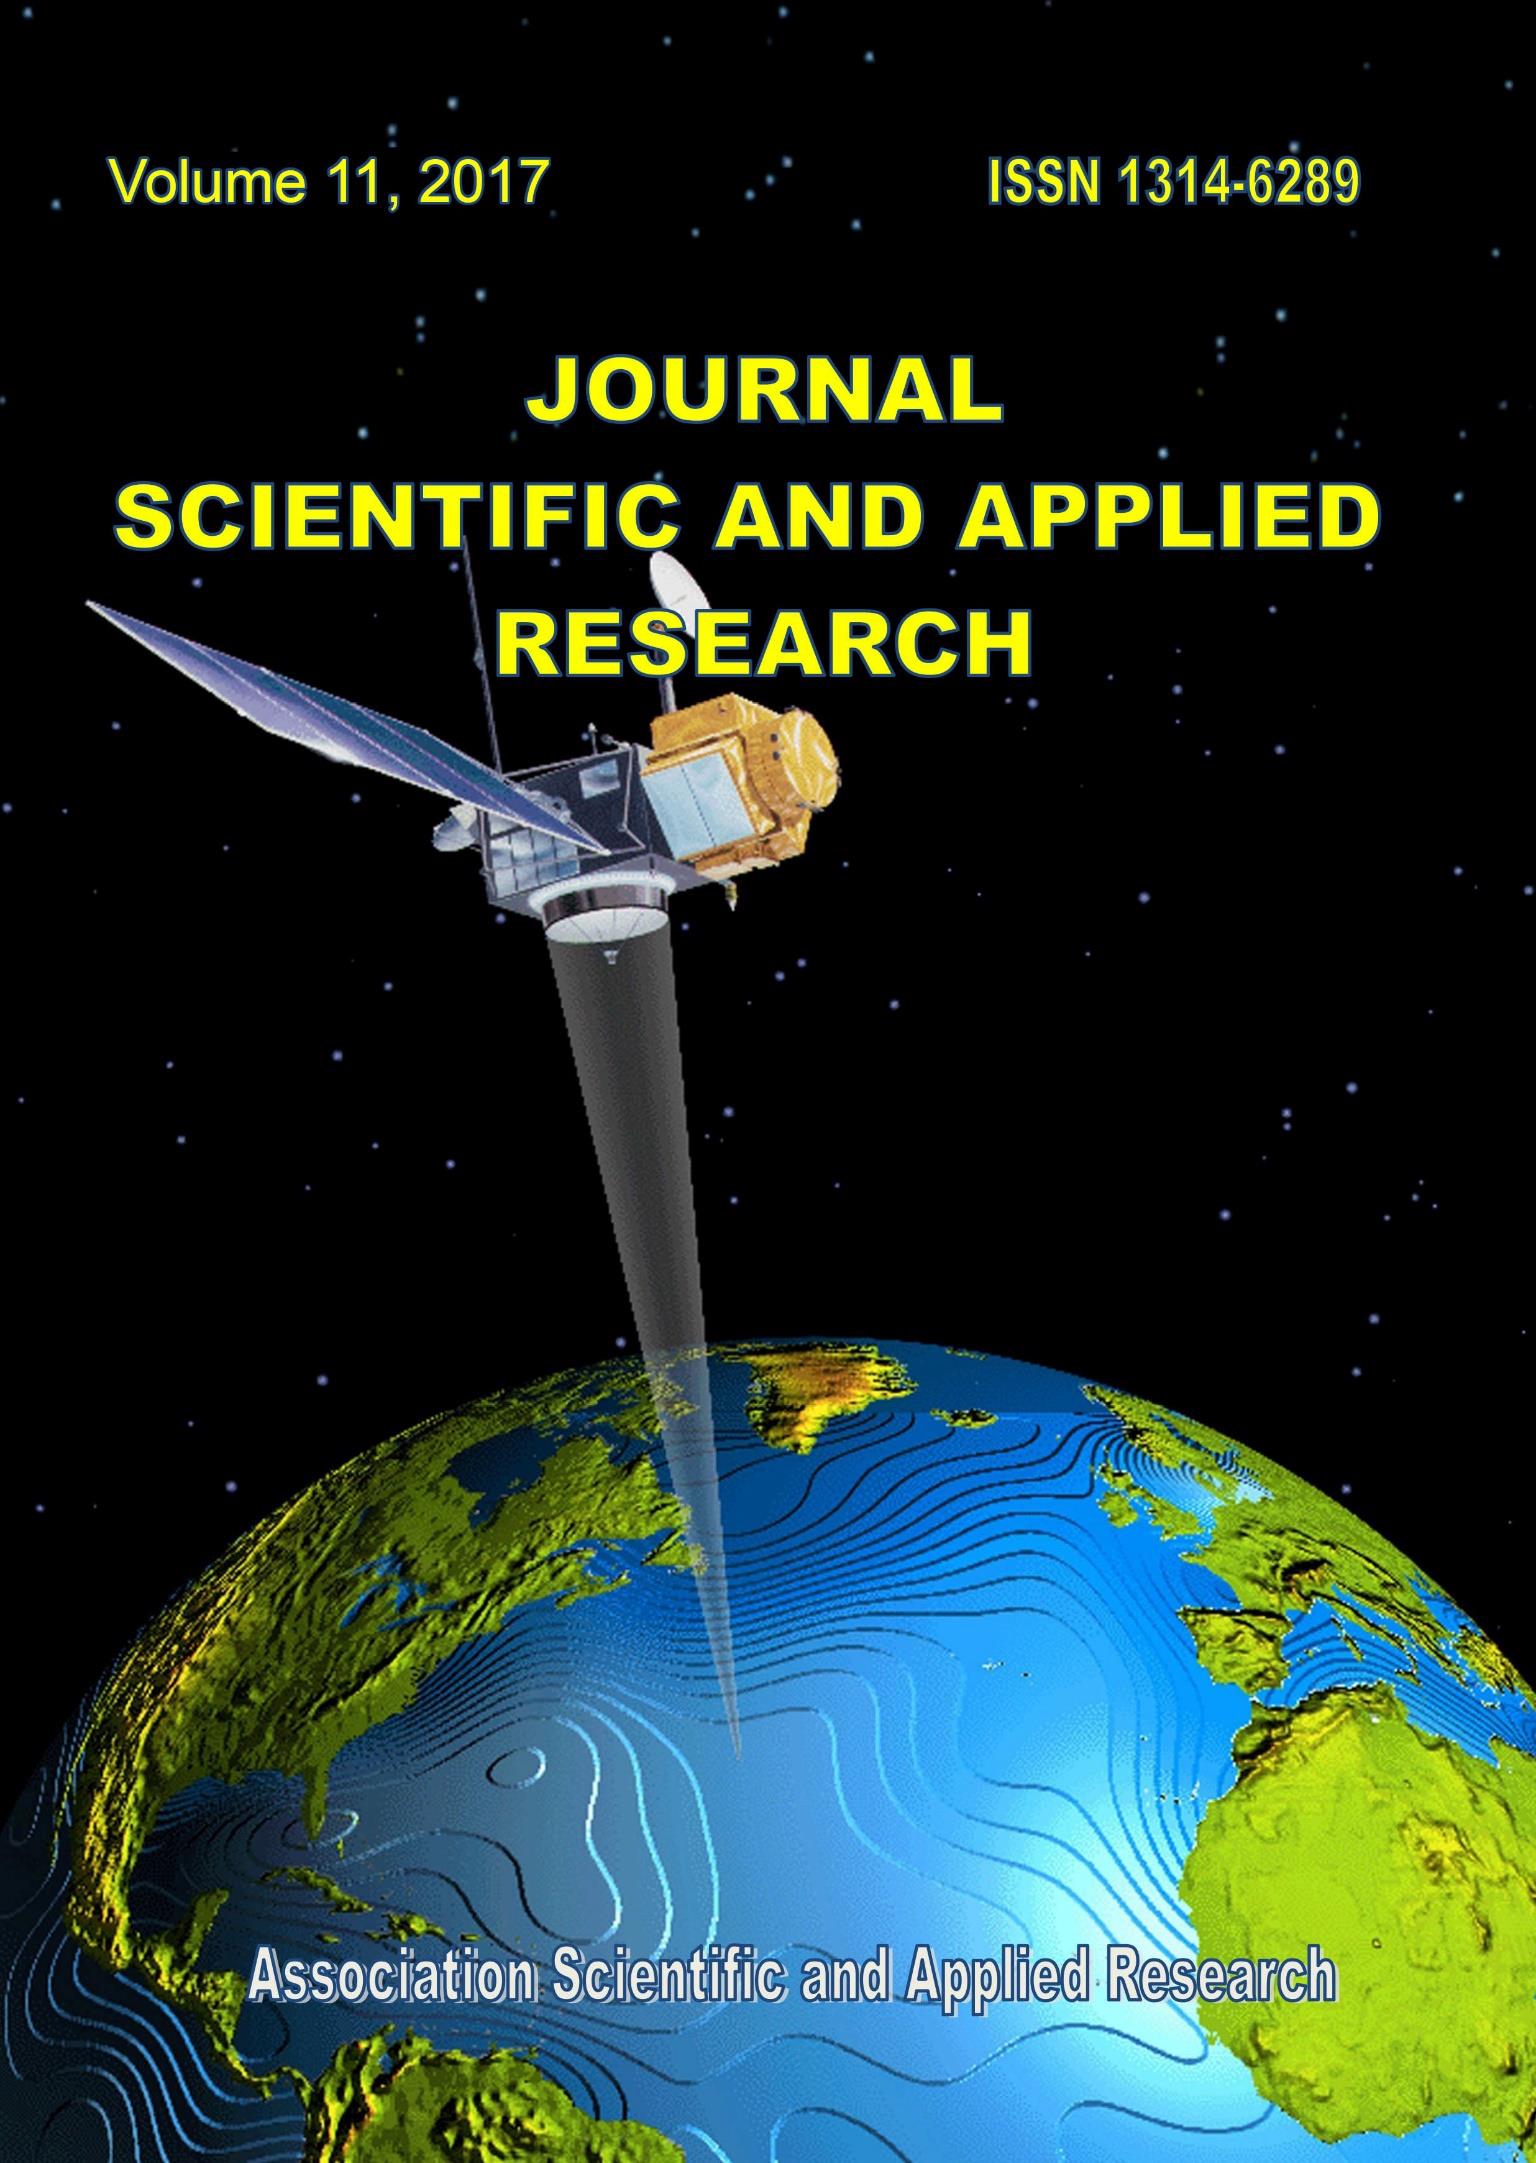 					View Vol. 11 No. 1 (2017): Journal Scientific and Applied Research
				